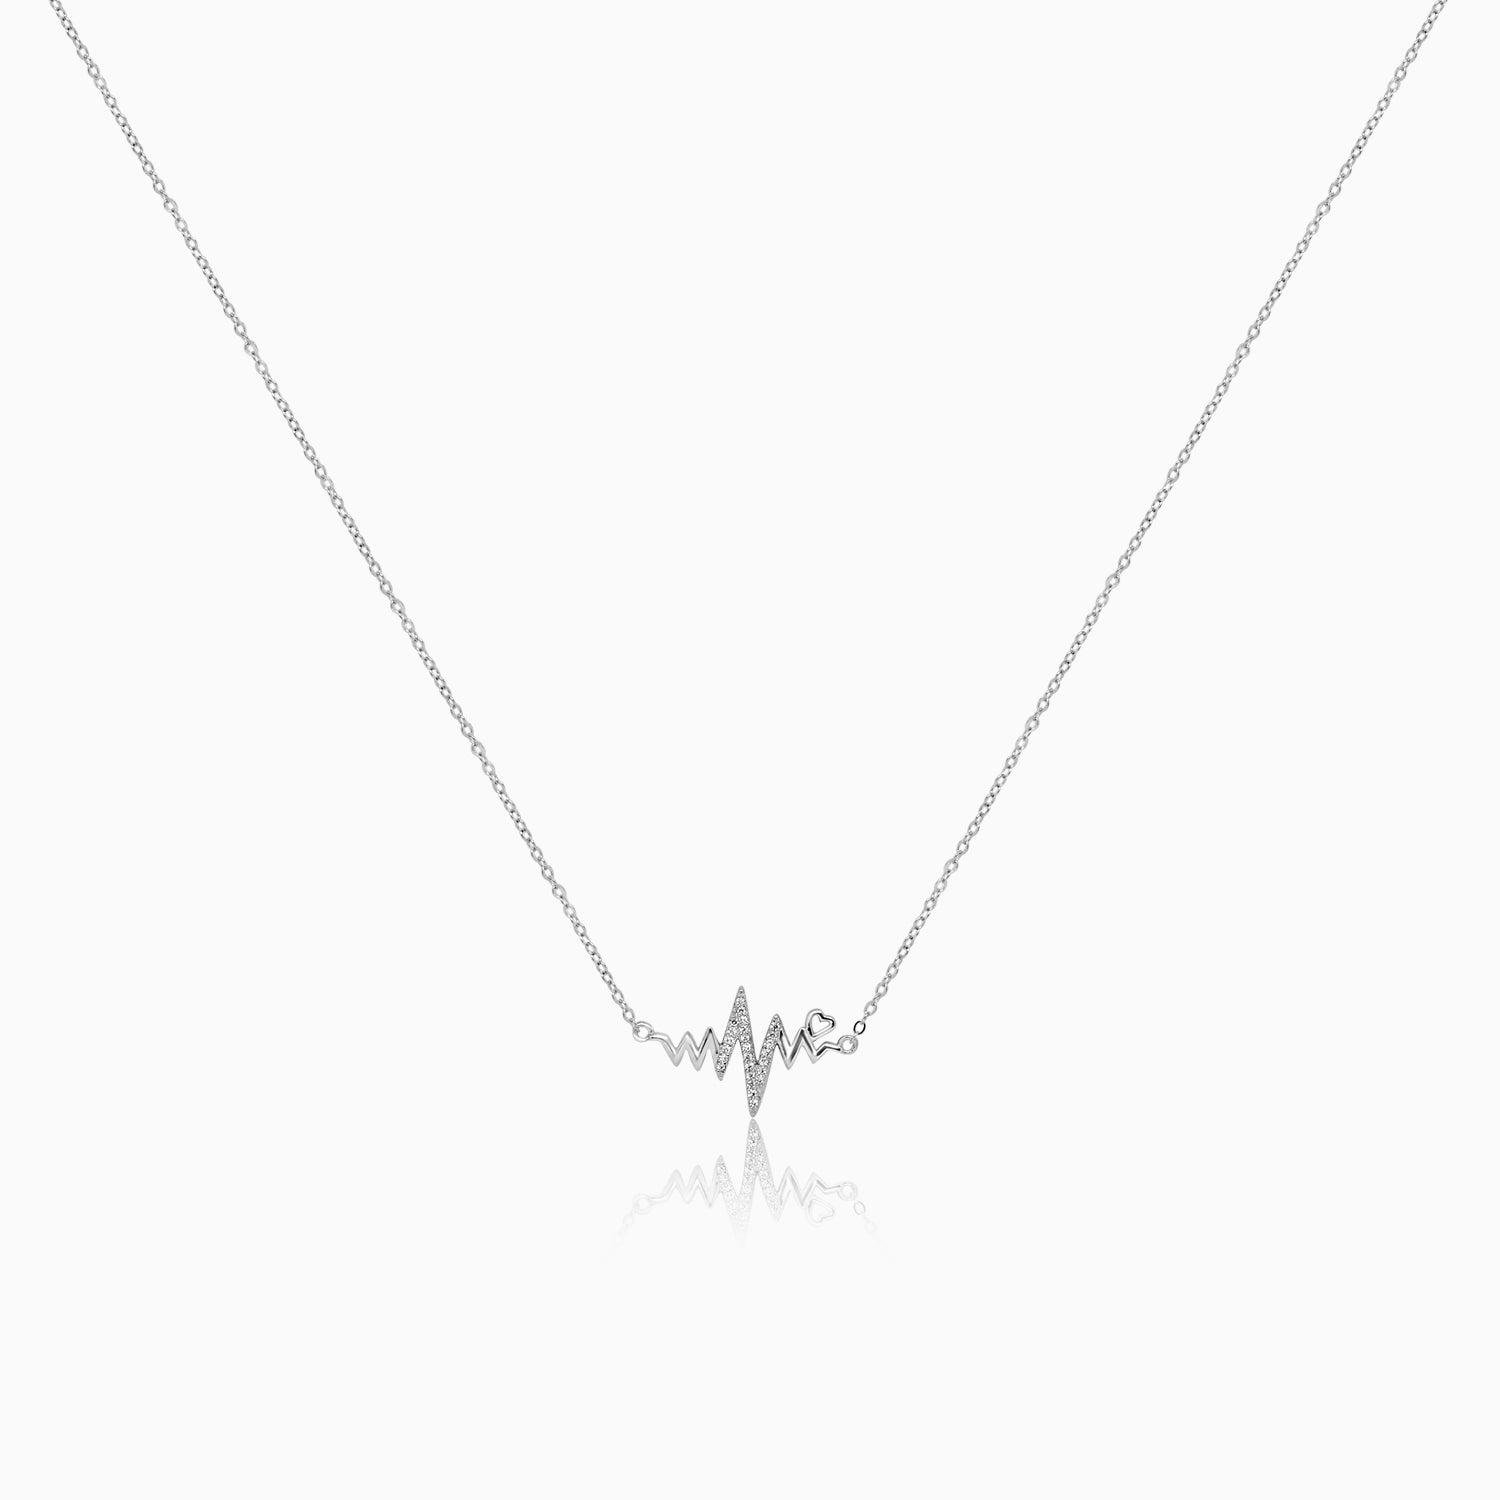 Silver Sparkling Heart Beat Necklace